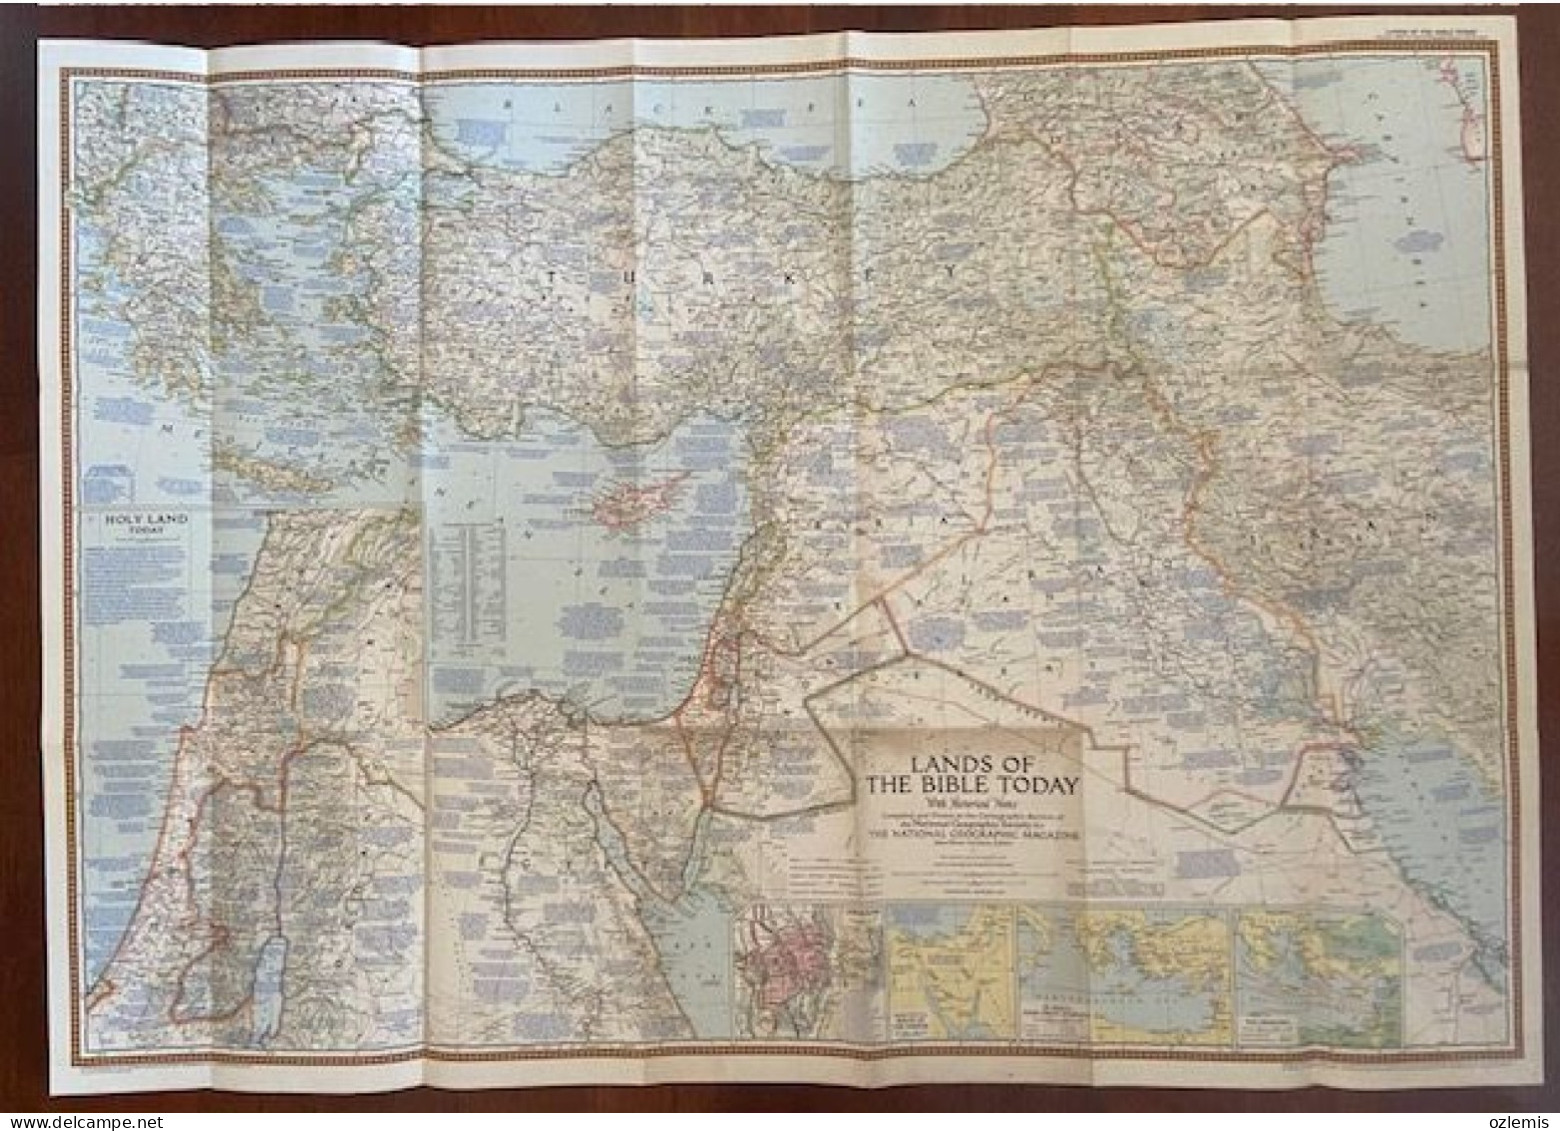 LANDS OF THE BIBLE TODAY WITH HISTORICAL NOTES ,THE NATIONAL GEOGRAPHIC MAGAZINE ,1956 ,MAP - Atlanti, Carte Geografiche